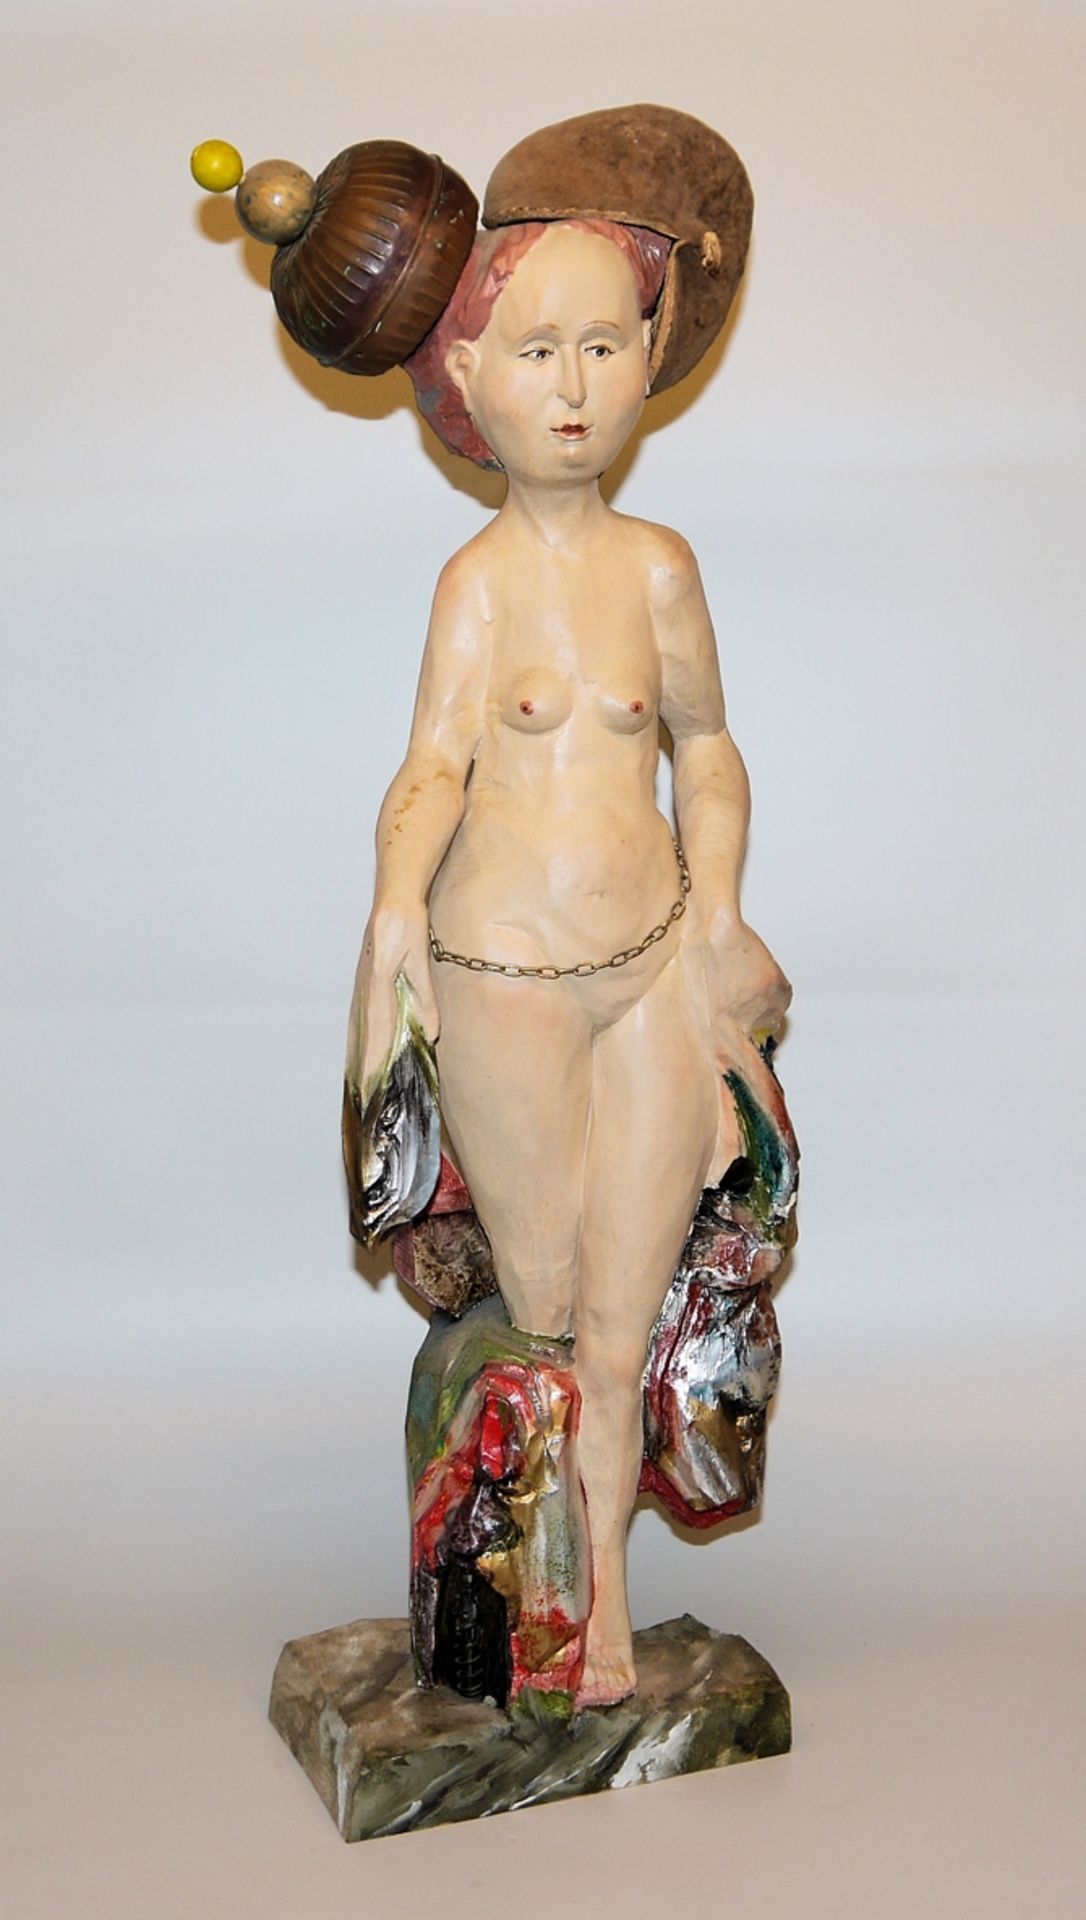 Bernhard Apfel, Venus after the Bath, wooden sculpture, painted, monogrammed, from 1998